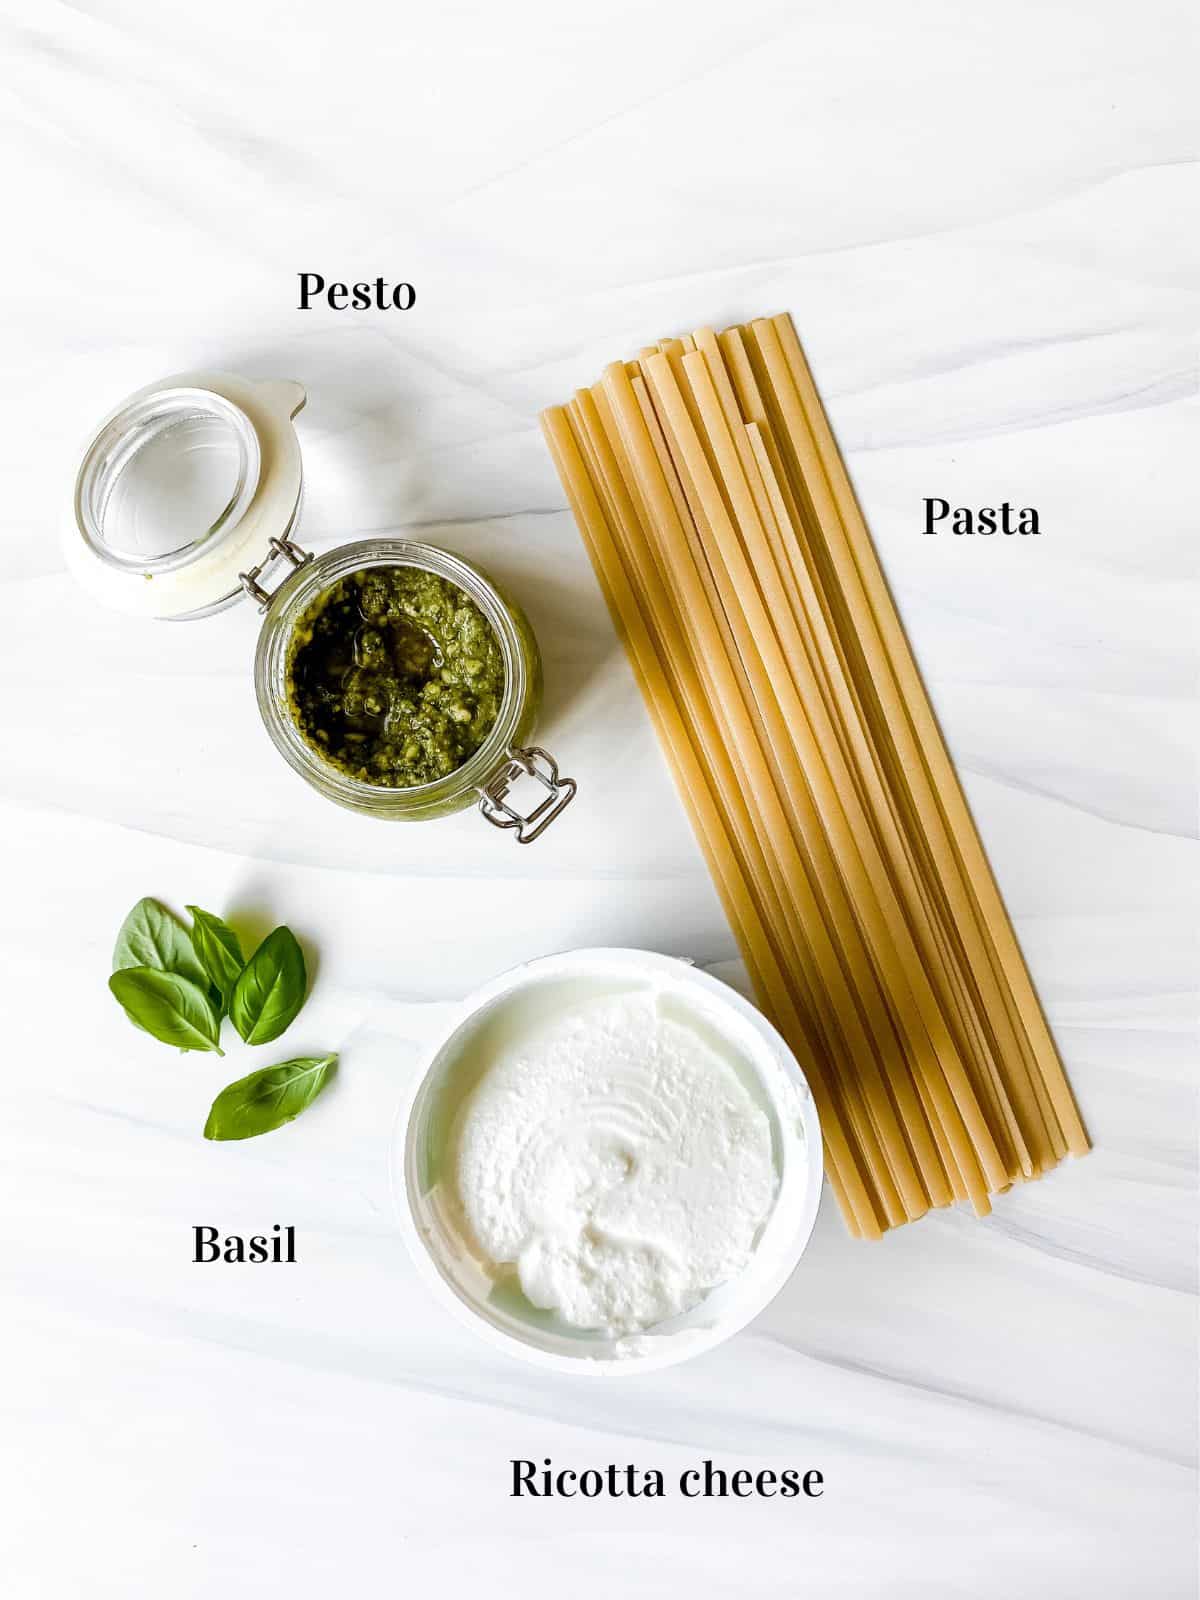 individually labelled pasta, a glass jar of pesto, basil leaves and ricotta cheese.